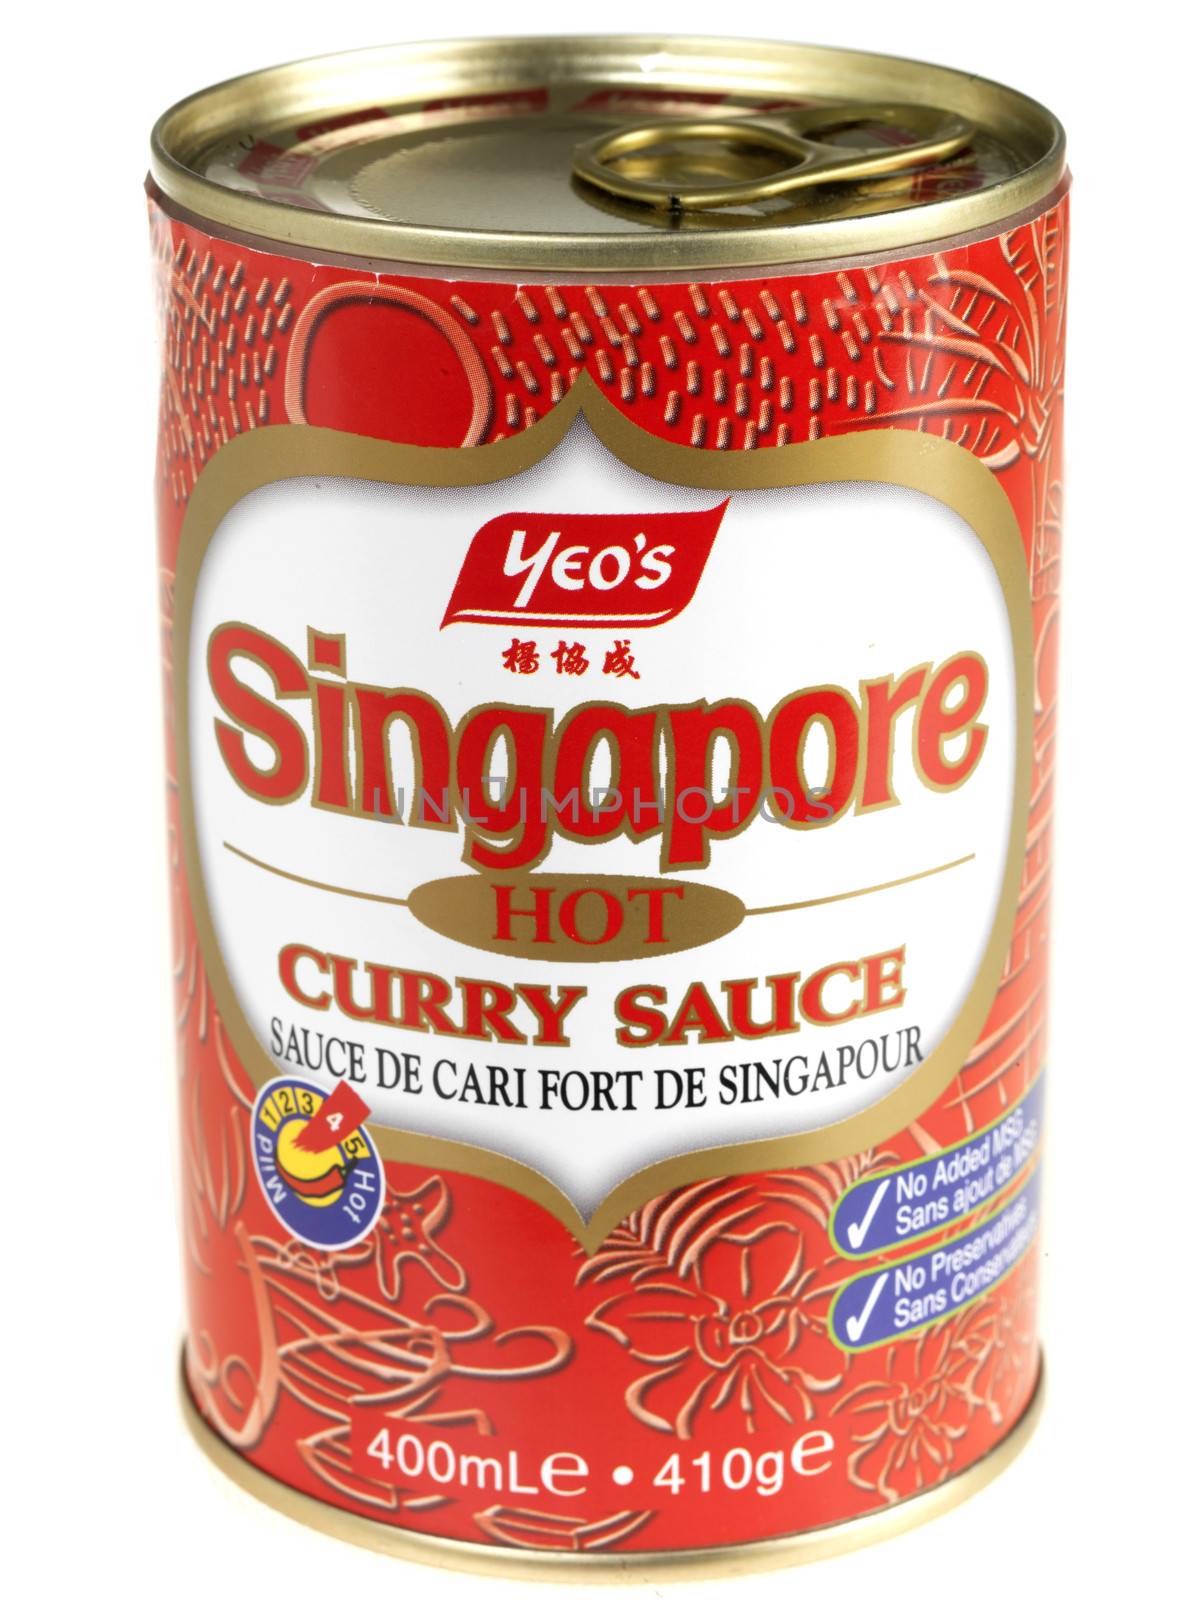 Tin of Singapore Curry Sauce by Whiteboxmedia